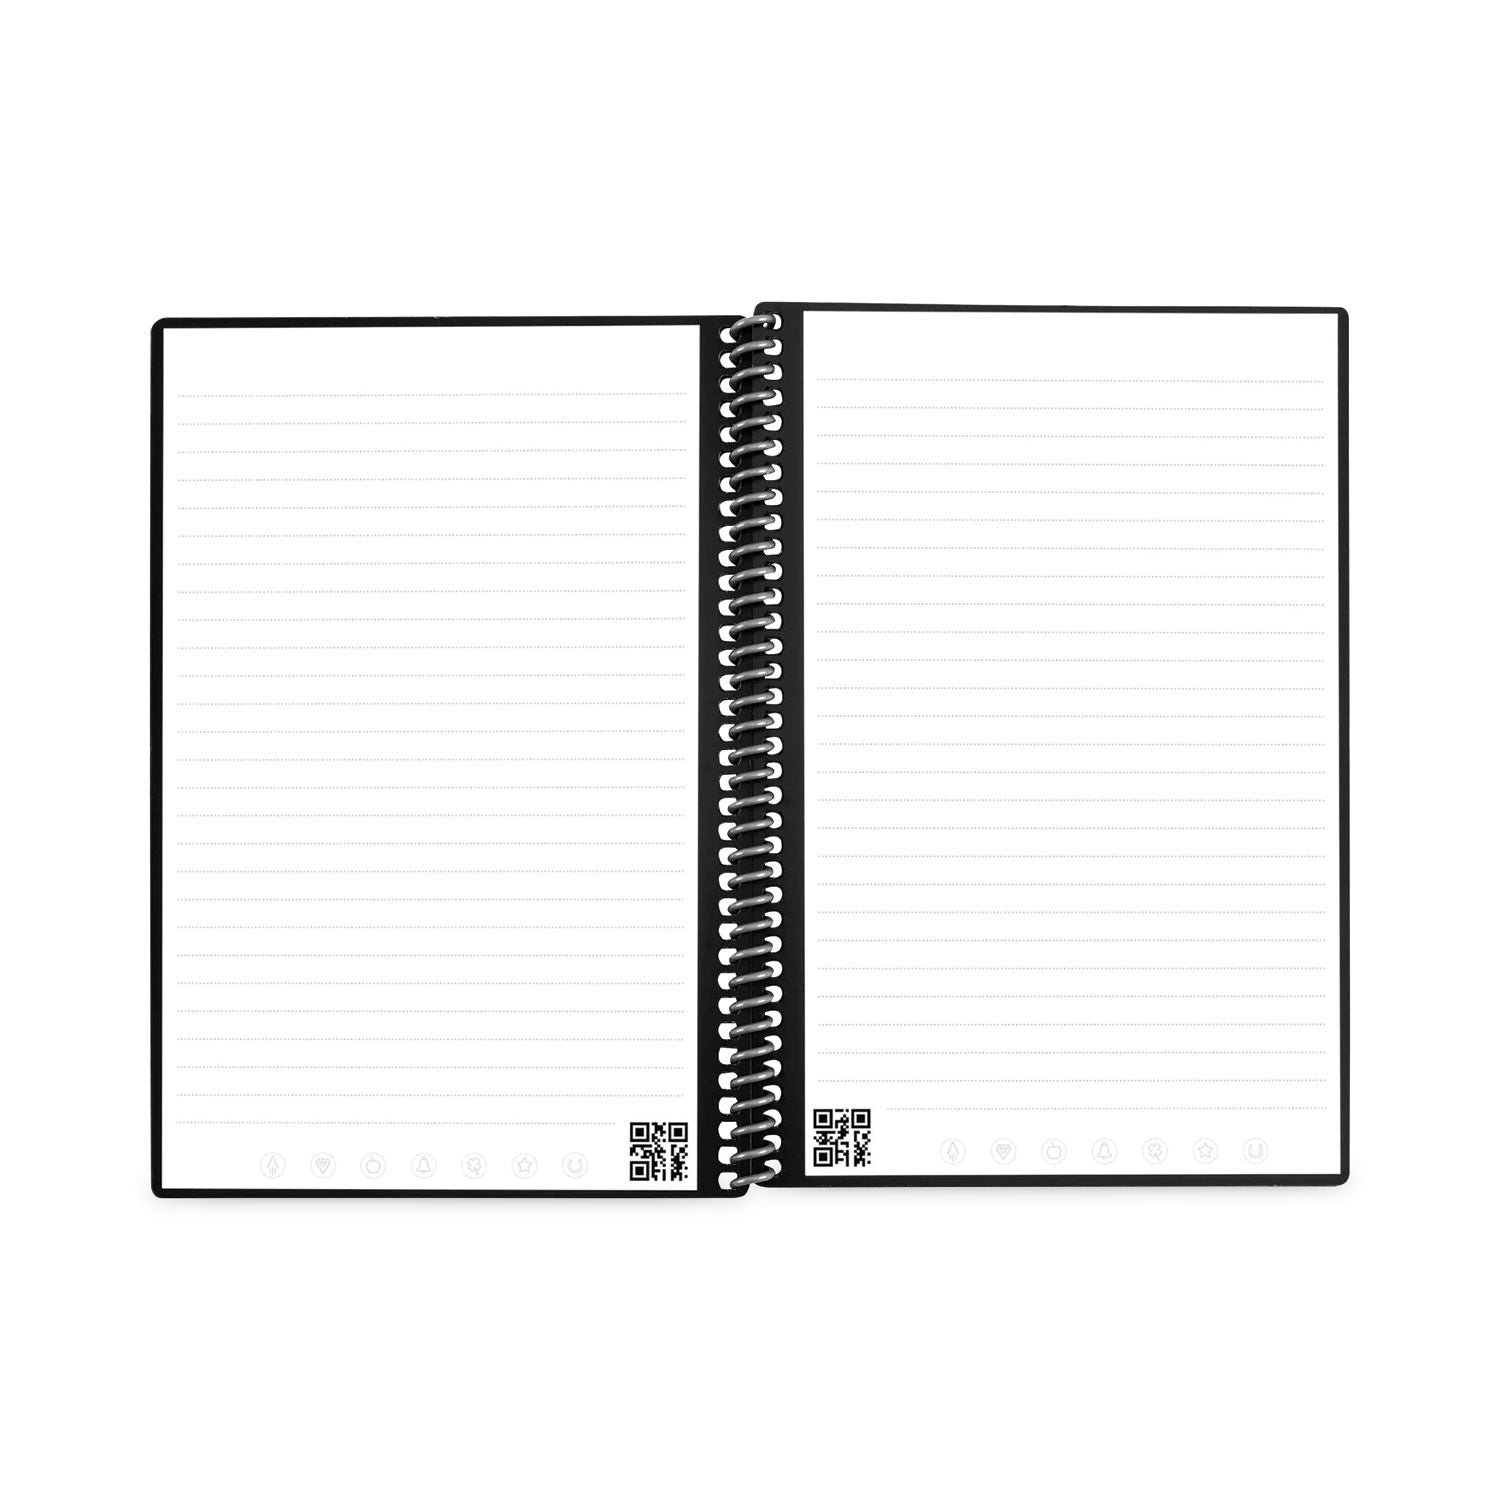 fusion-smart-notebook-seven-assorted-page-formats-gray-cover-21-11-x-85-sheets_rkbevrflrccigfr - 5